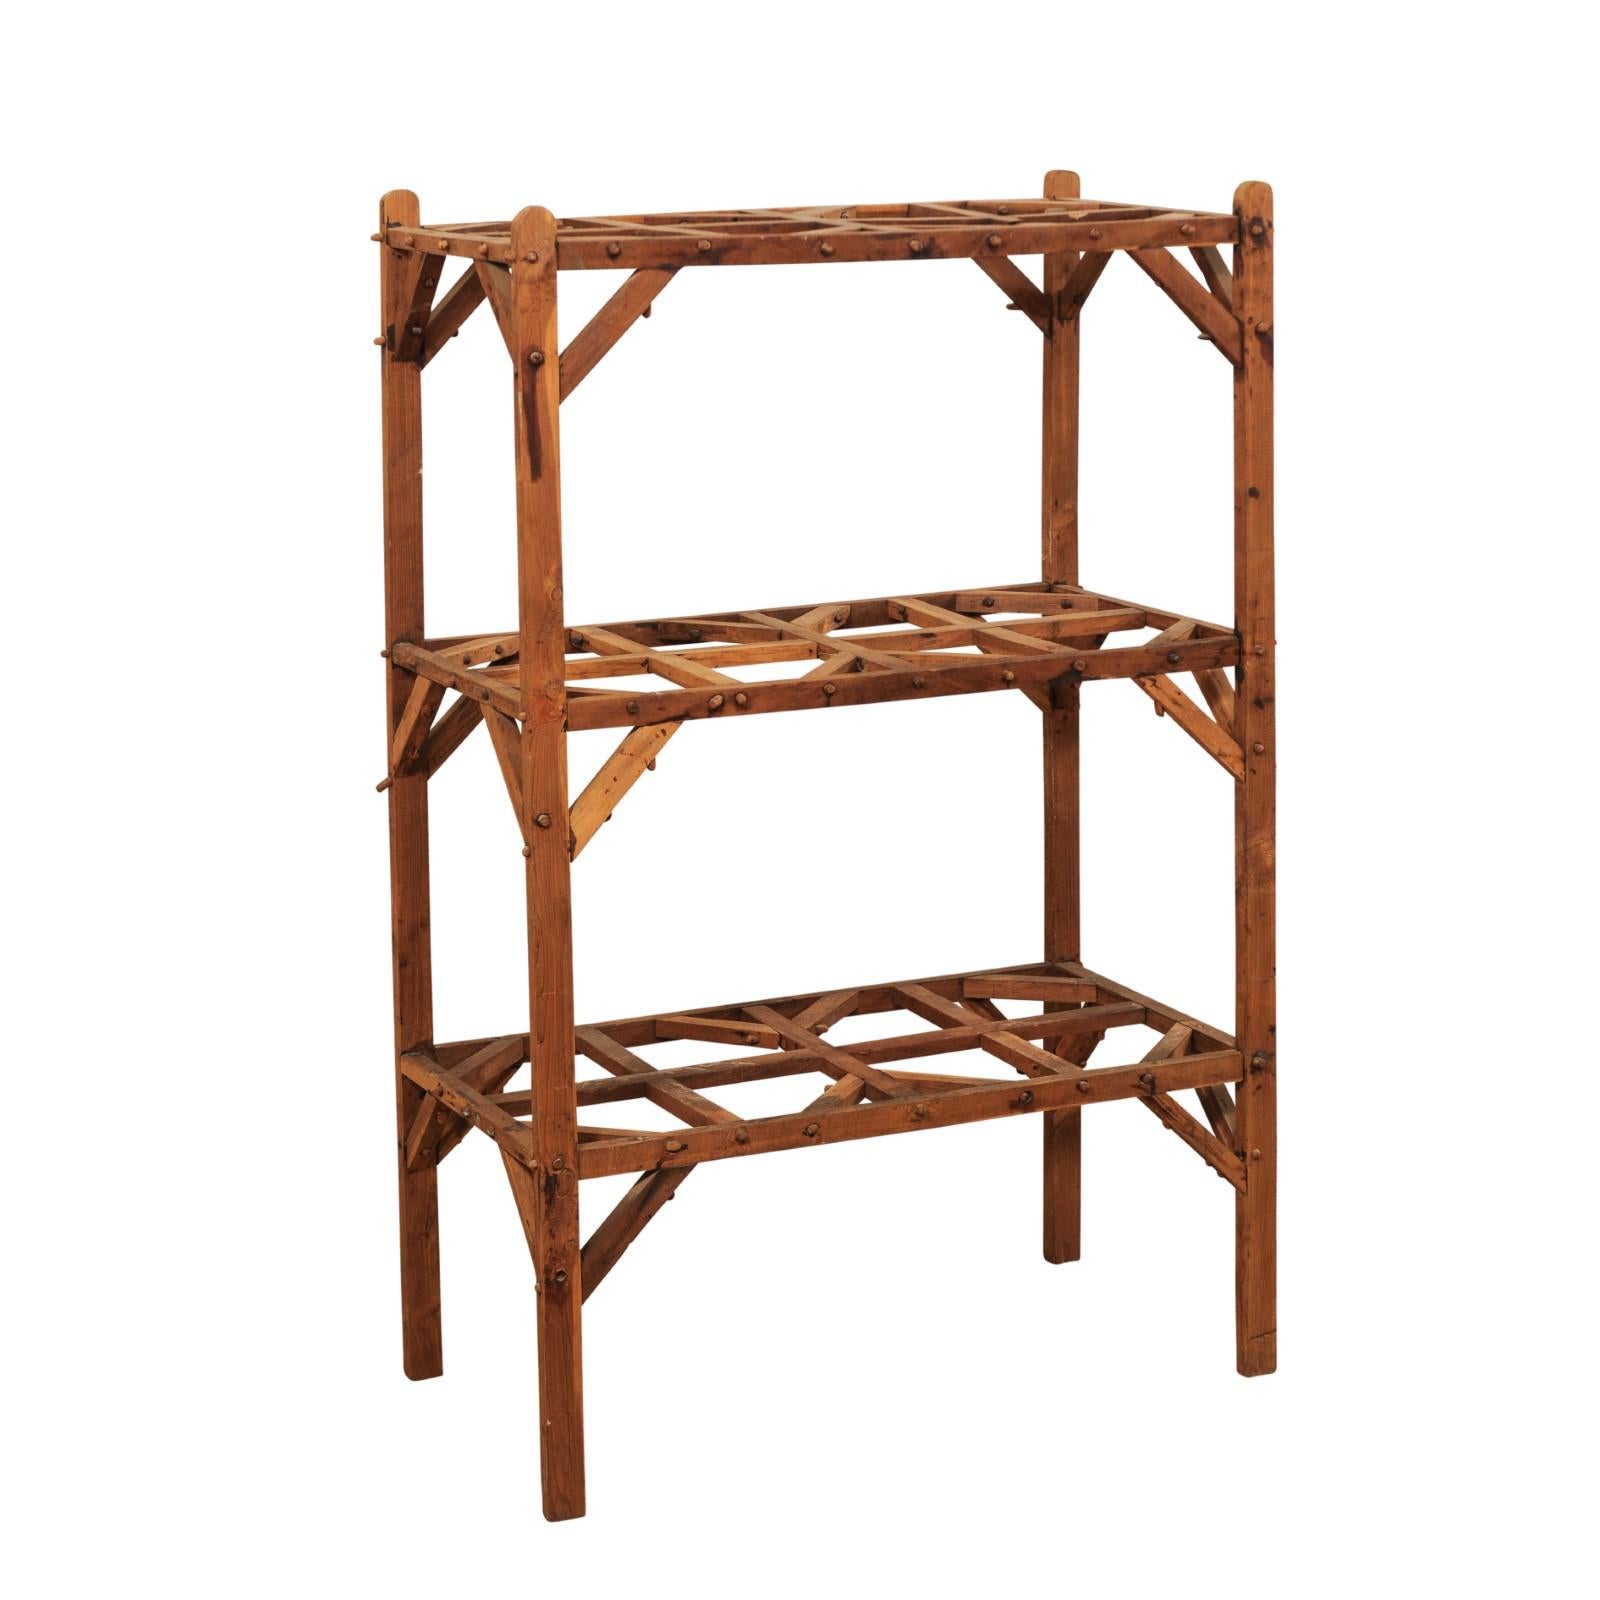 Vintage French Beautifully Crafted Open Wood Shelving Unit